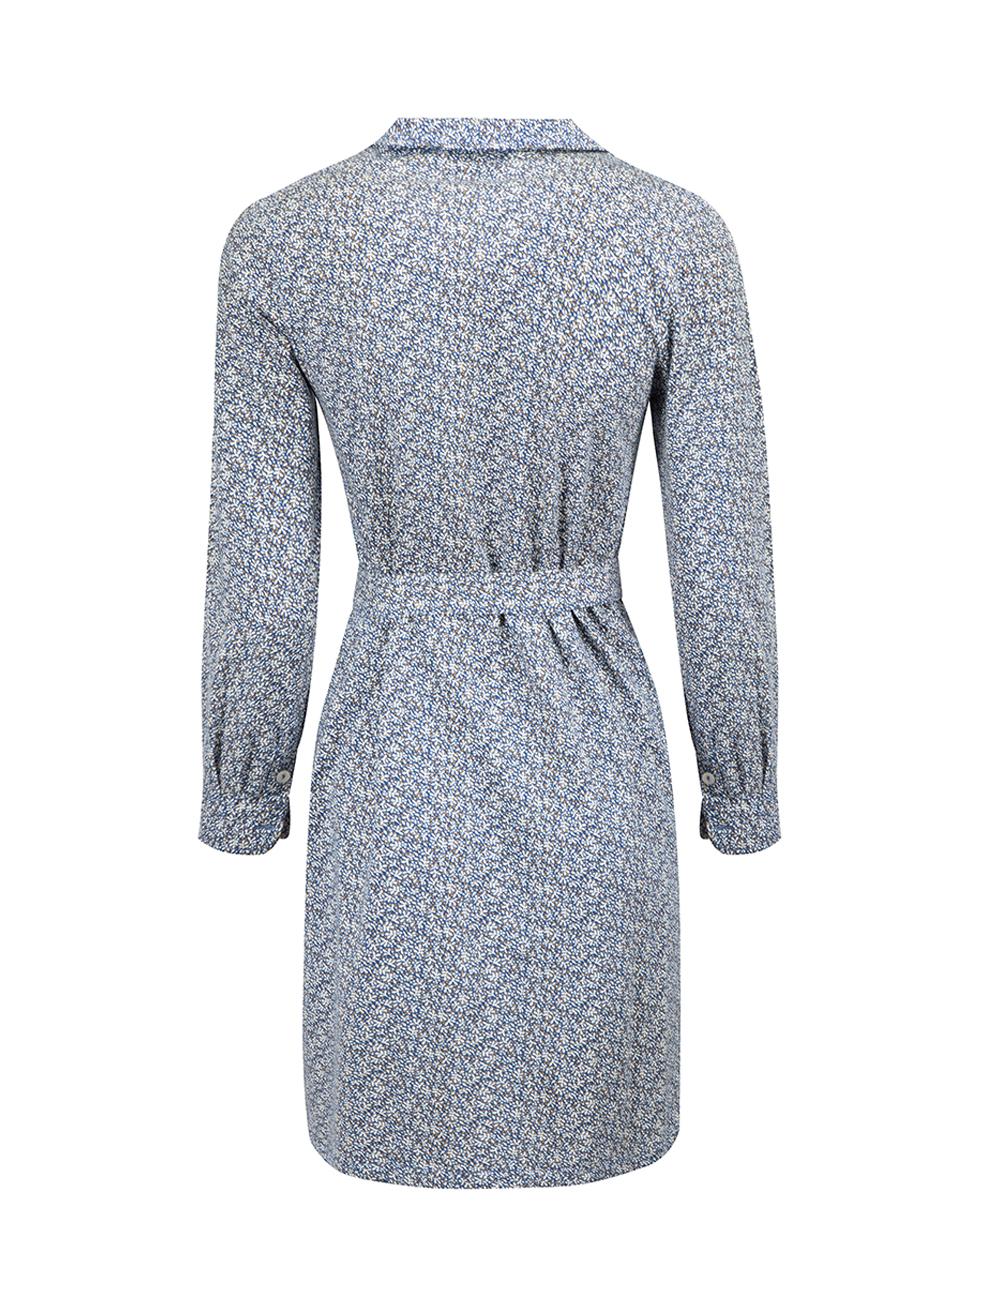 Blue Cotton Abstract Print Mid-Length Shirt Dress Size S In Good Condition For Sale In London, GB